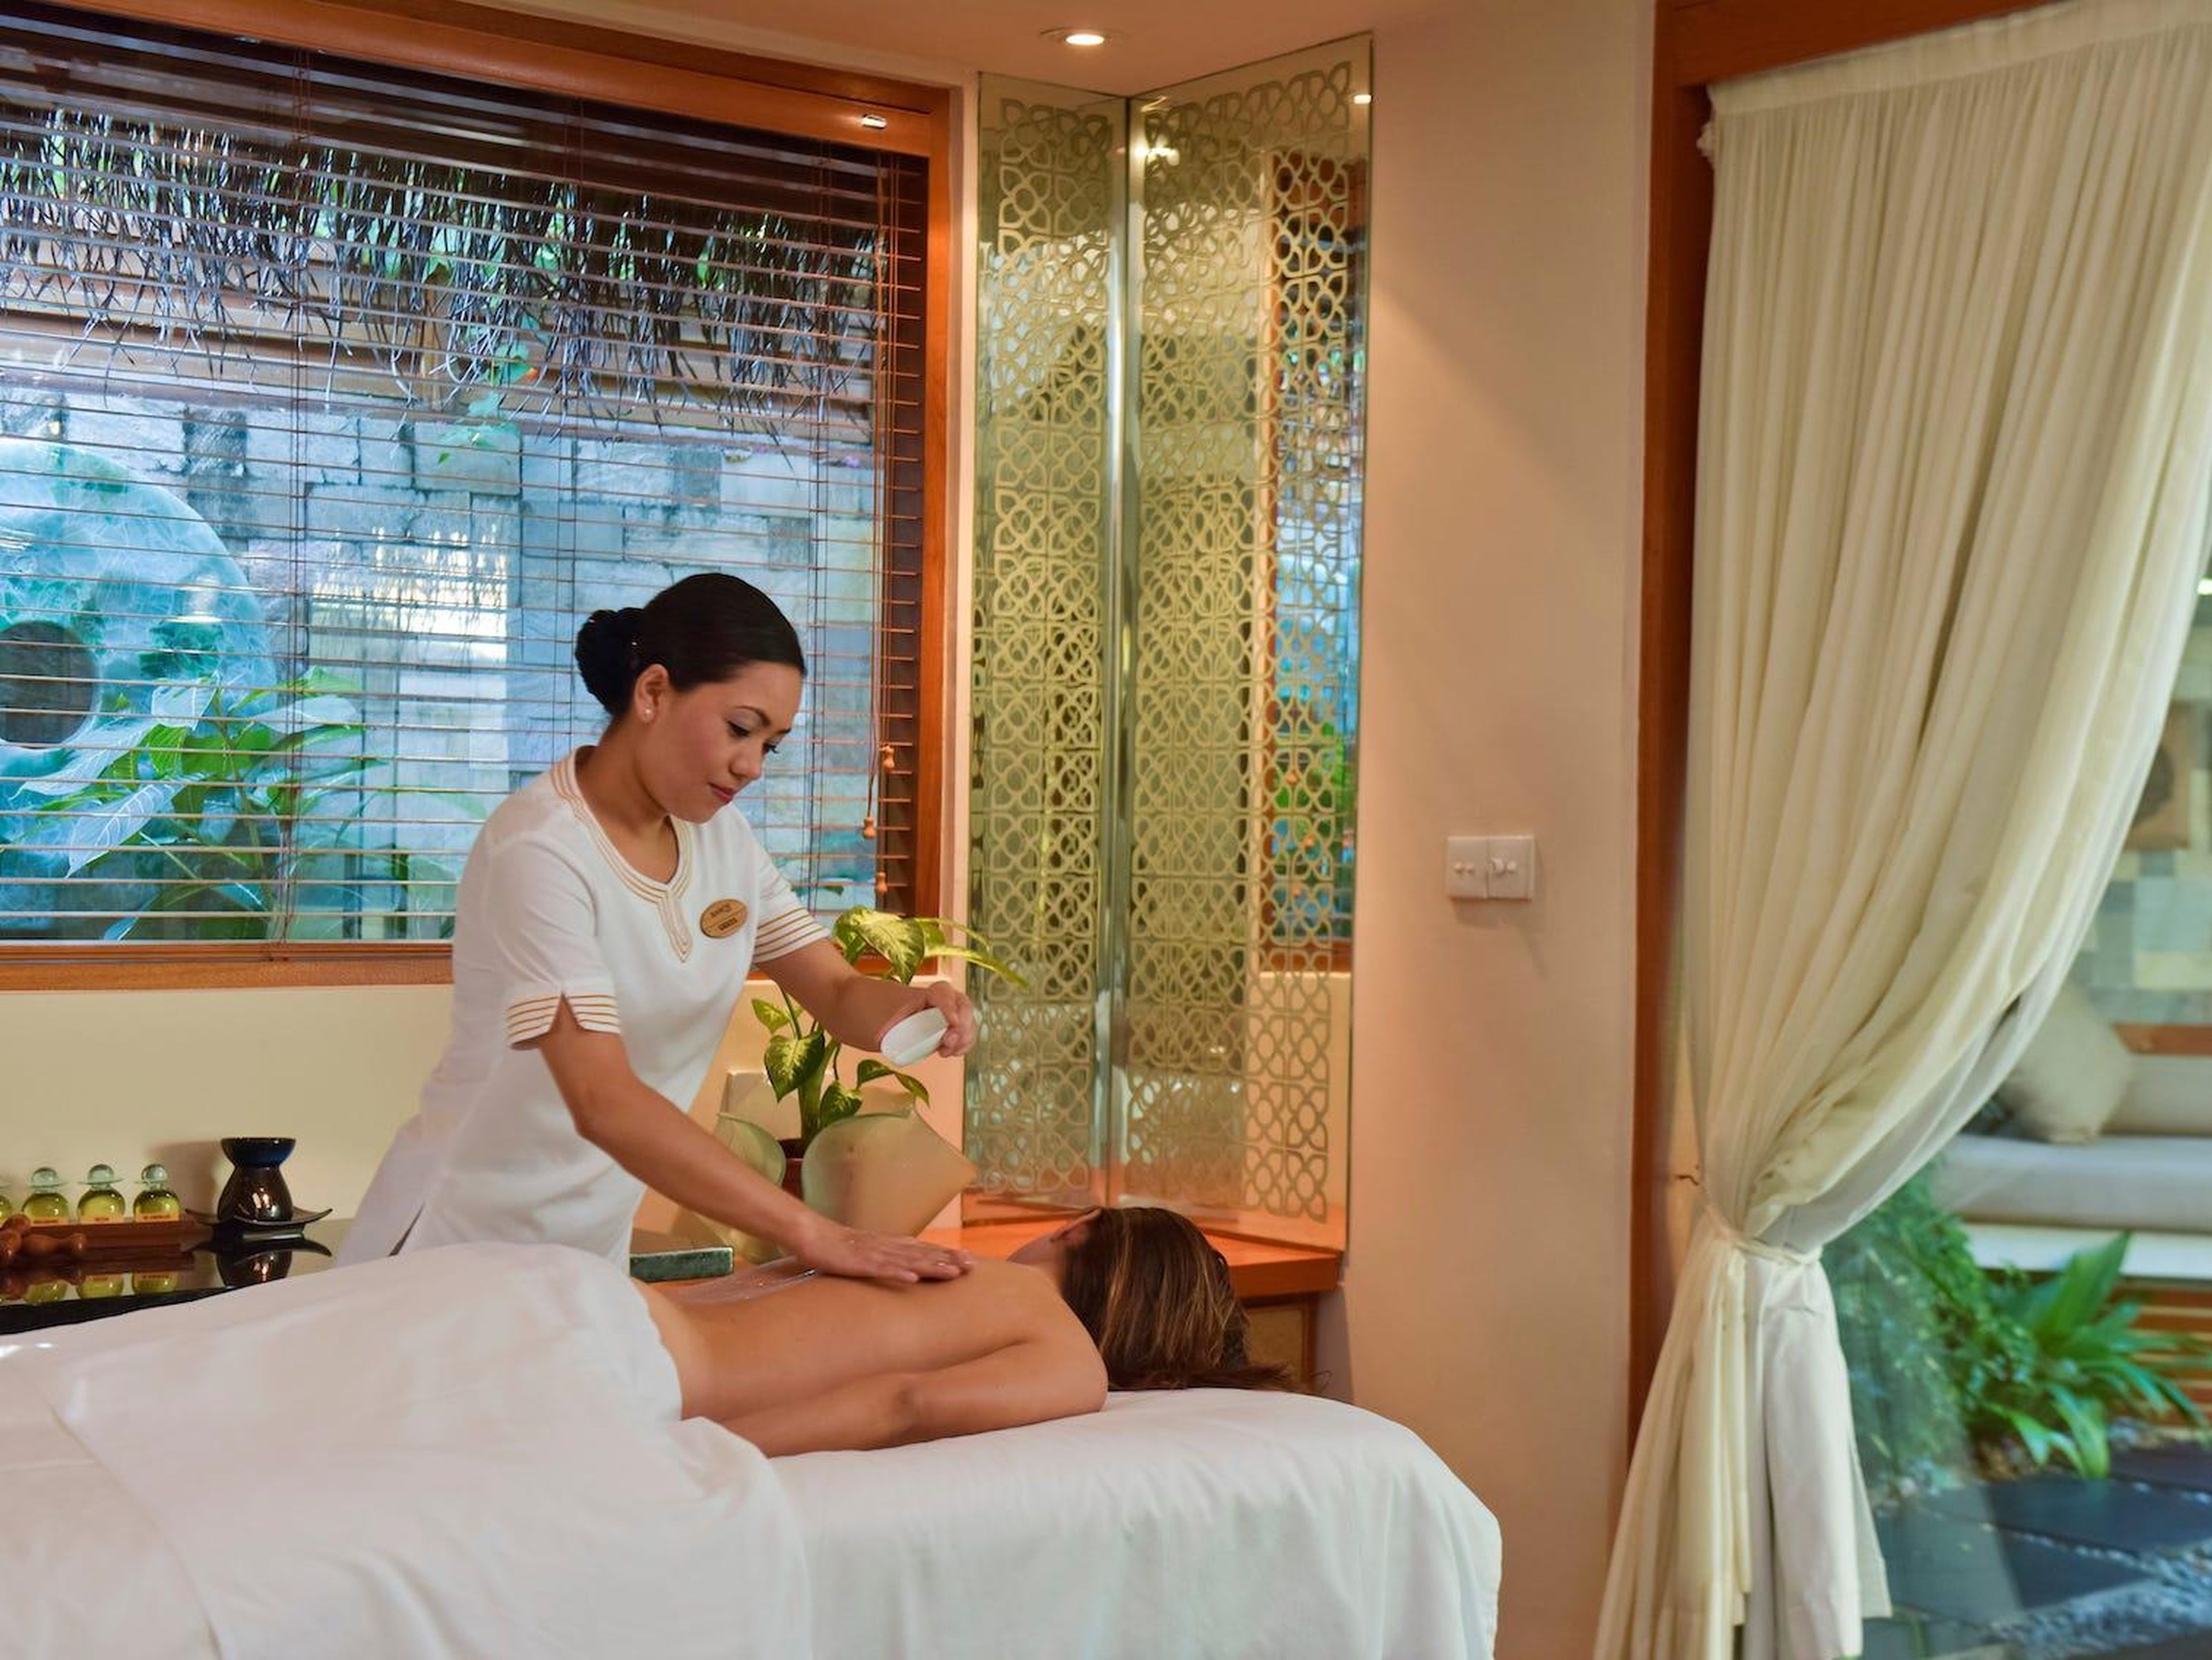 Spa services range from manicures ($95) and pedicures ($115) to full-body mud wraps ($205) and 12 different types of massages ($175-$215).